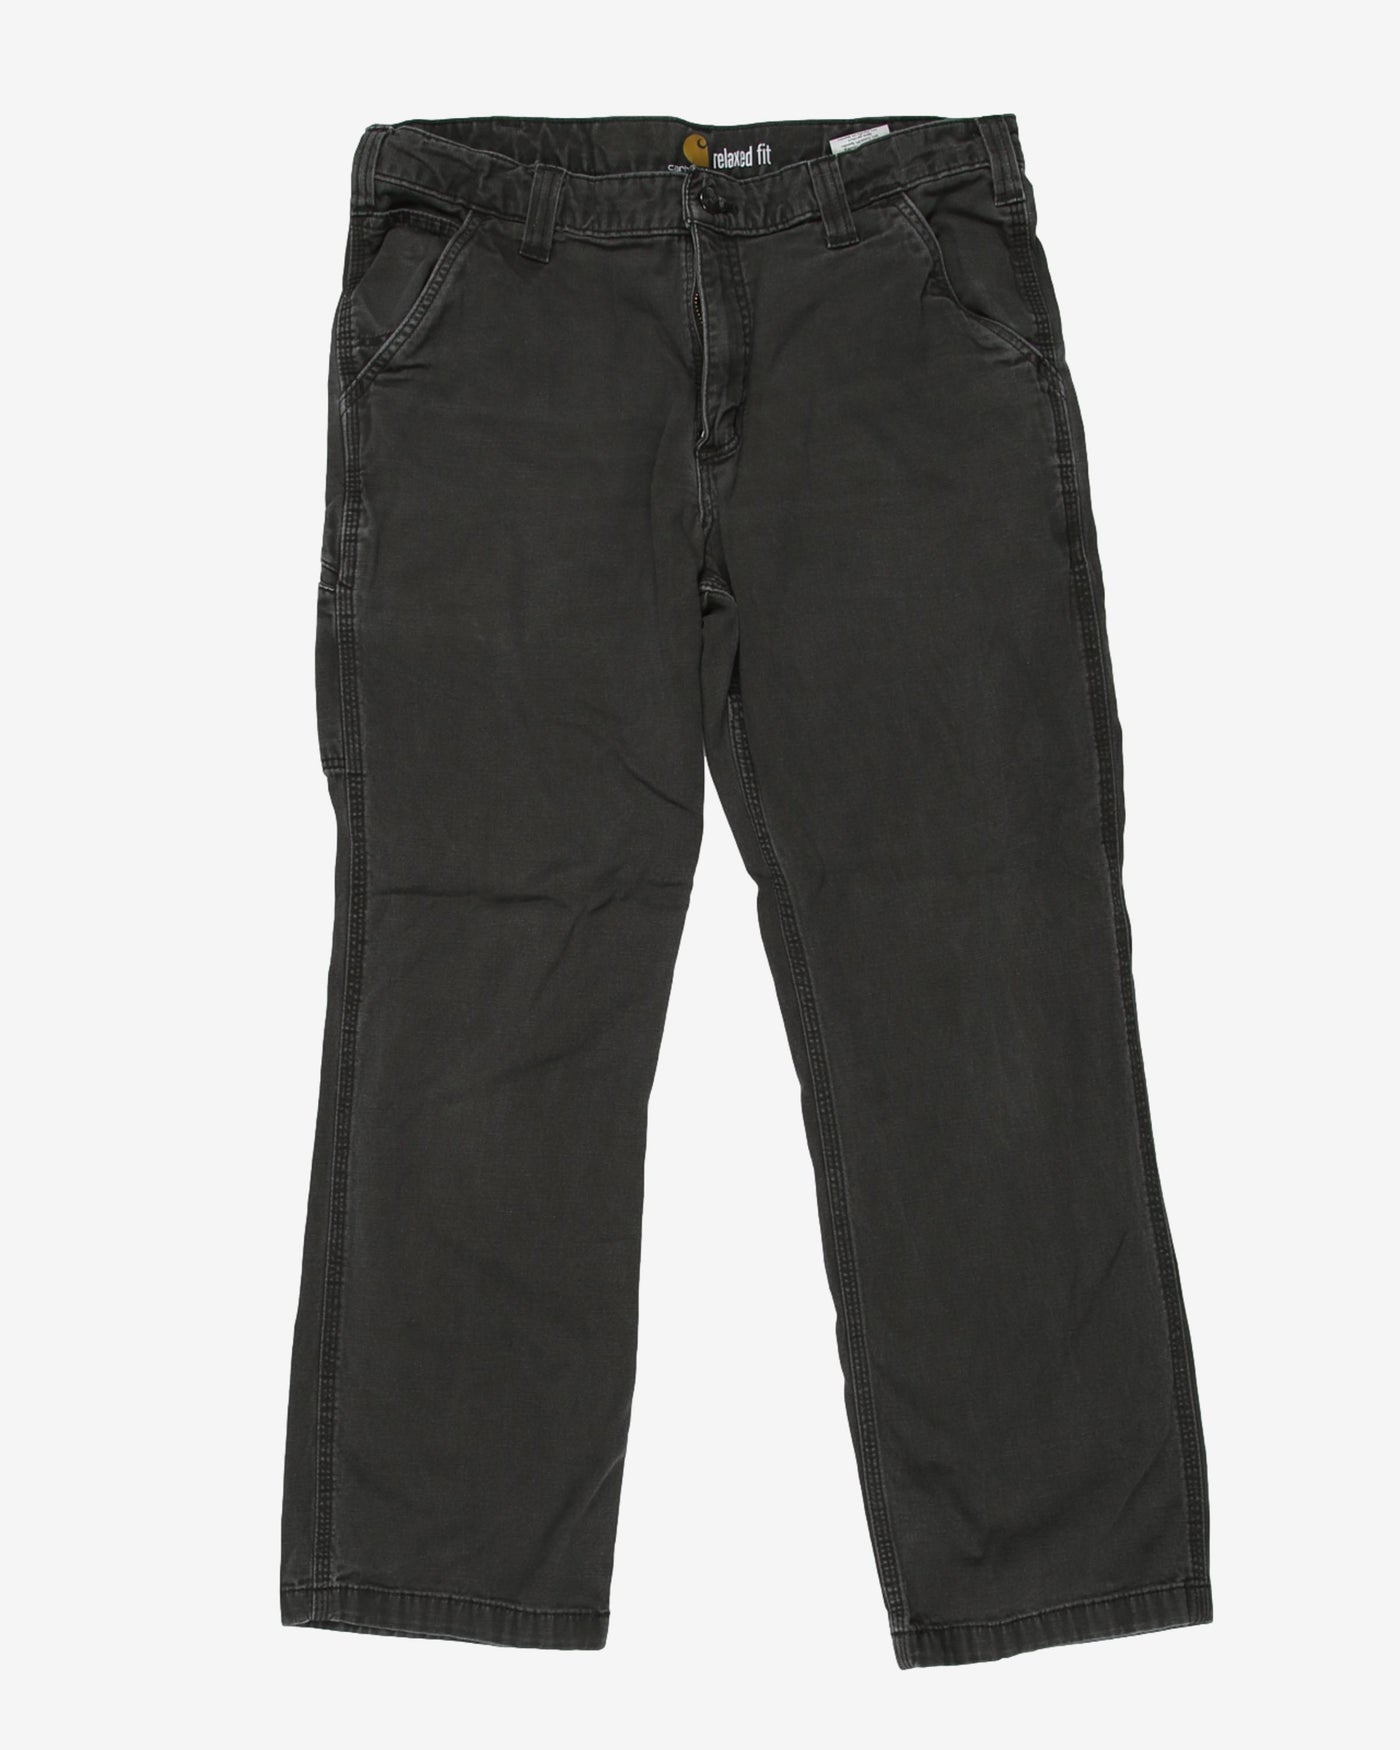 Carhartt Dark Grey Relaxed Fit Casual Workwear Trousers - W34 L28